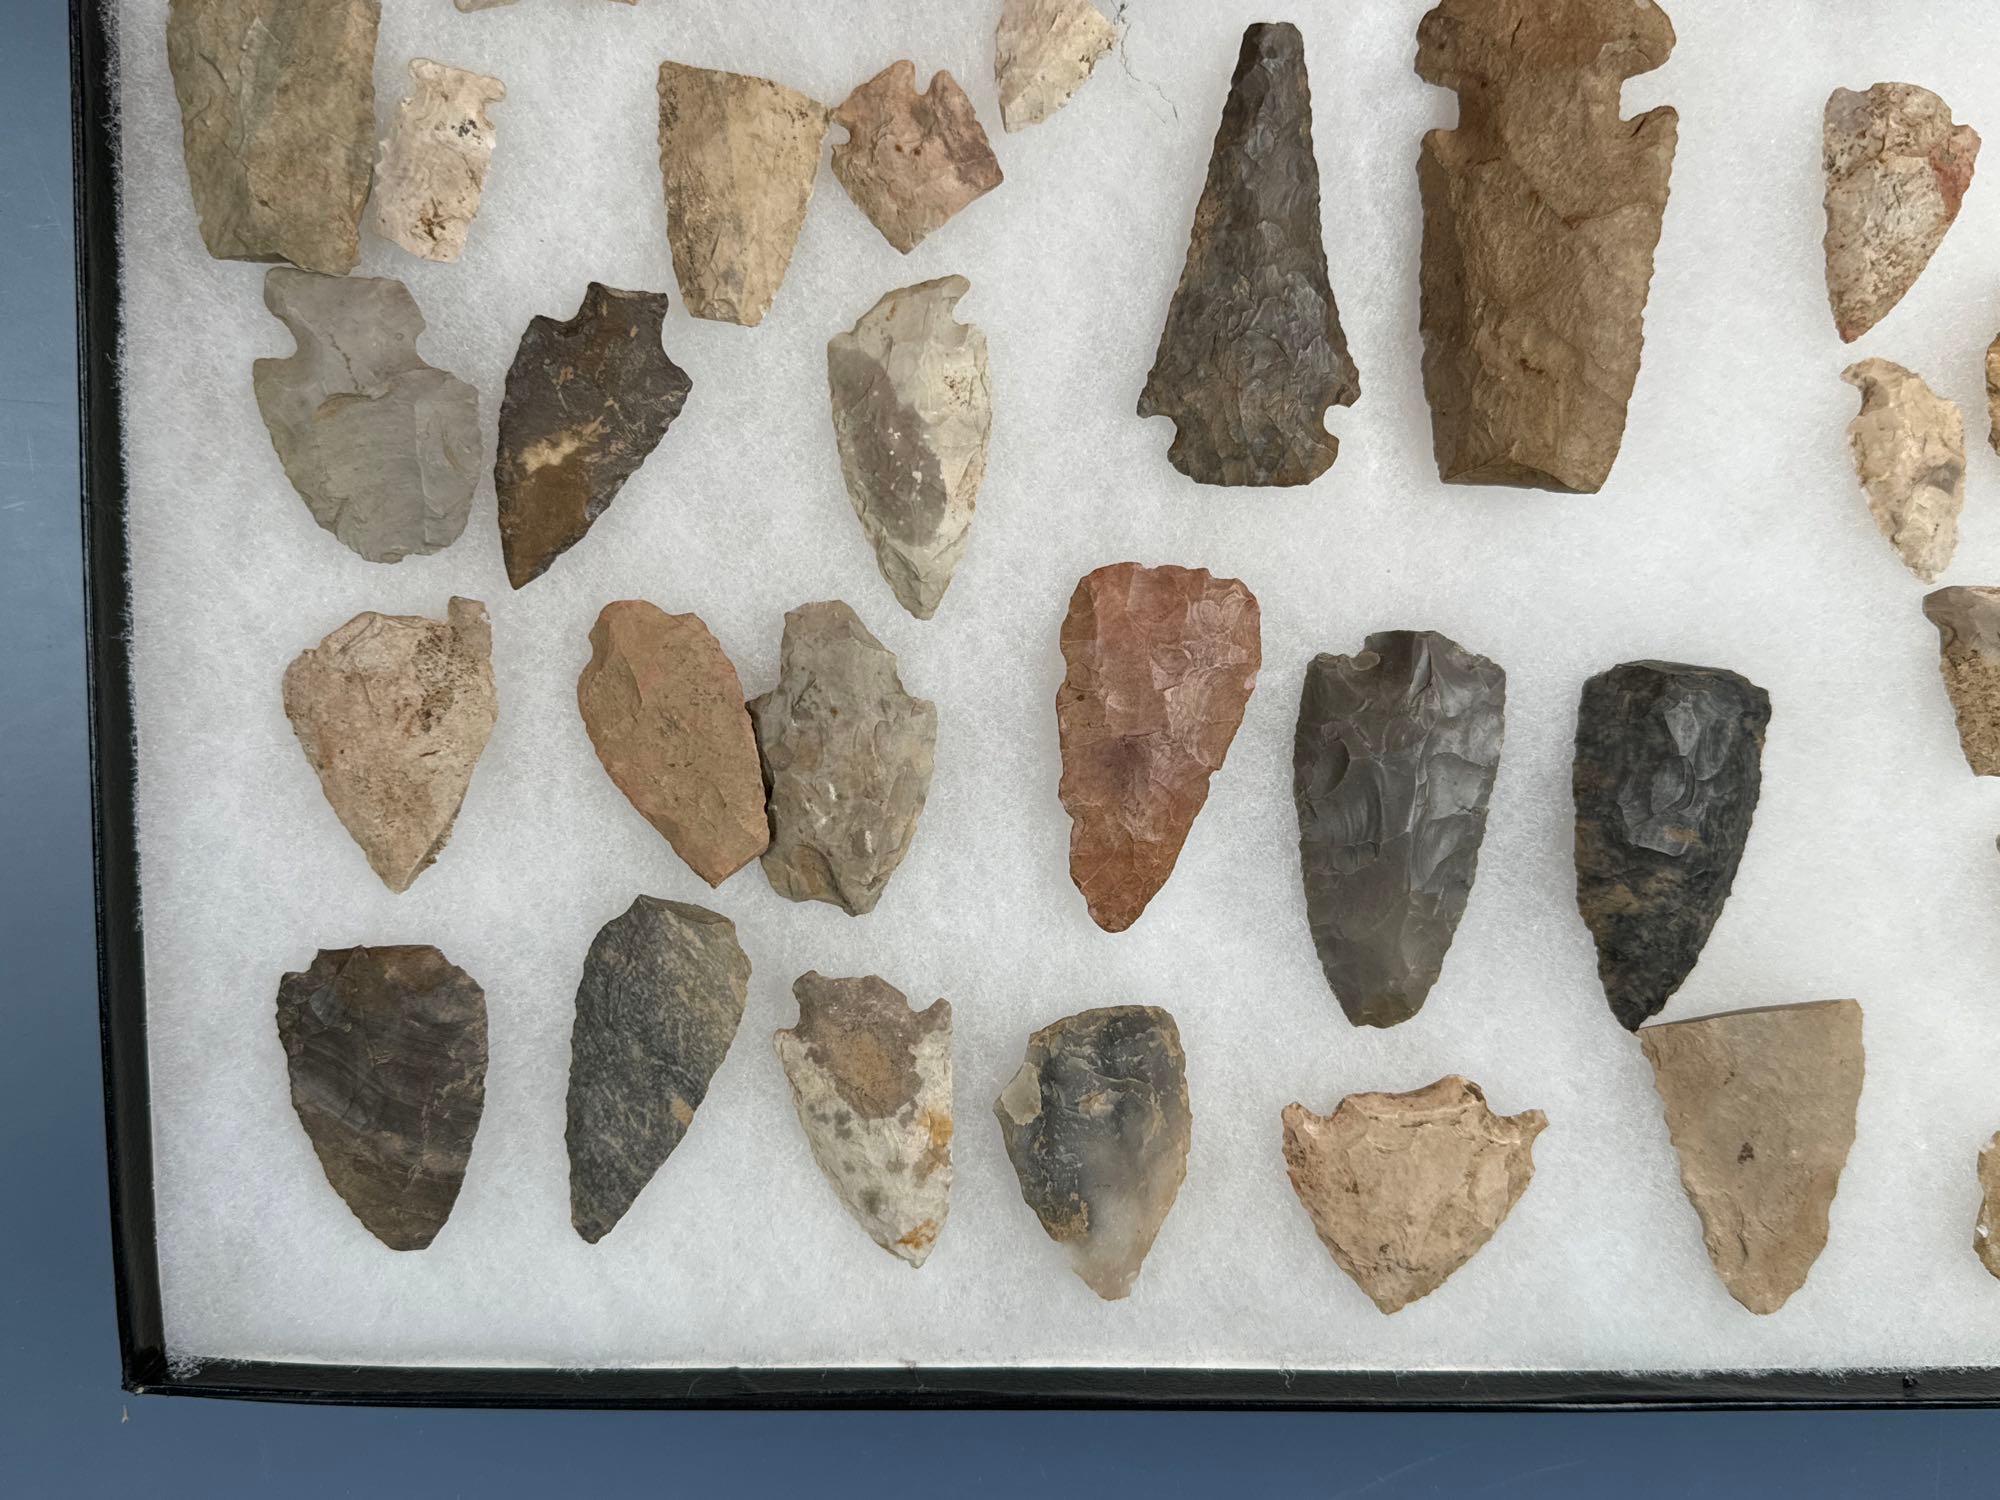 Large Lot of Central States/Midwestern Arrowheads, Some Broken, Many Whole, Longest is 3"